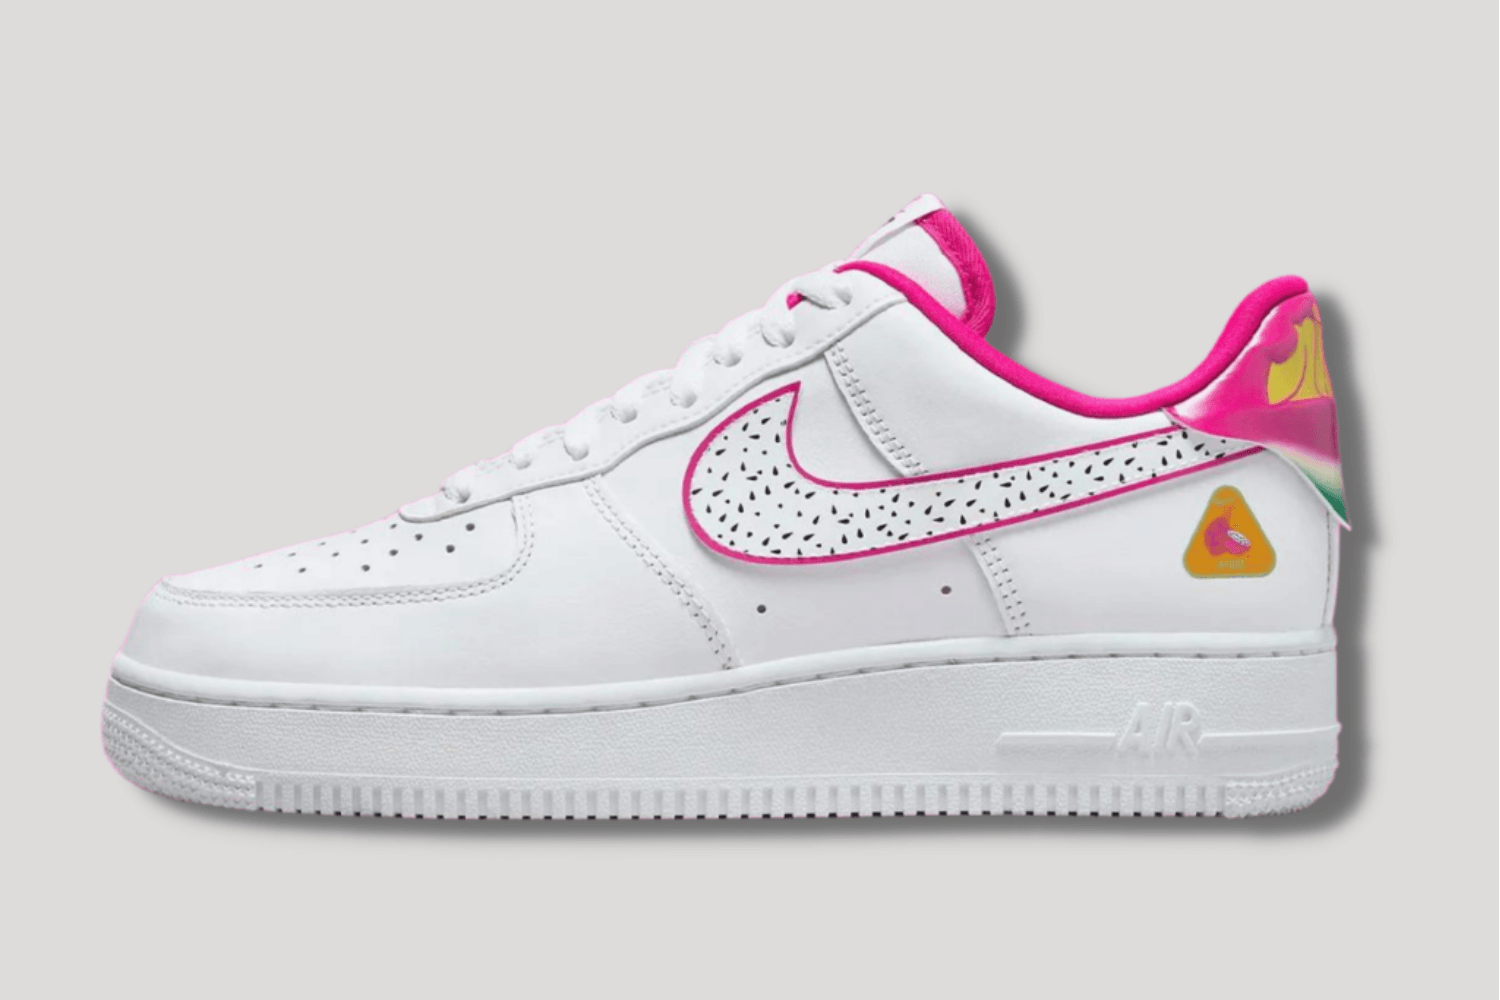 The Nike Air Force 1 'Dragonfruit' in detail